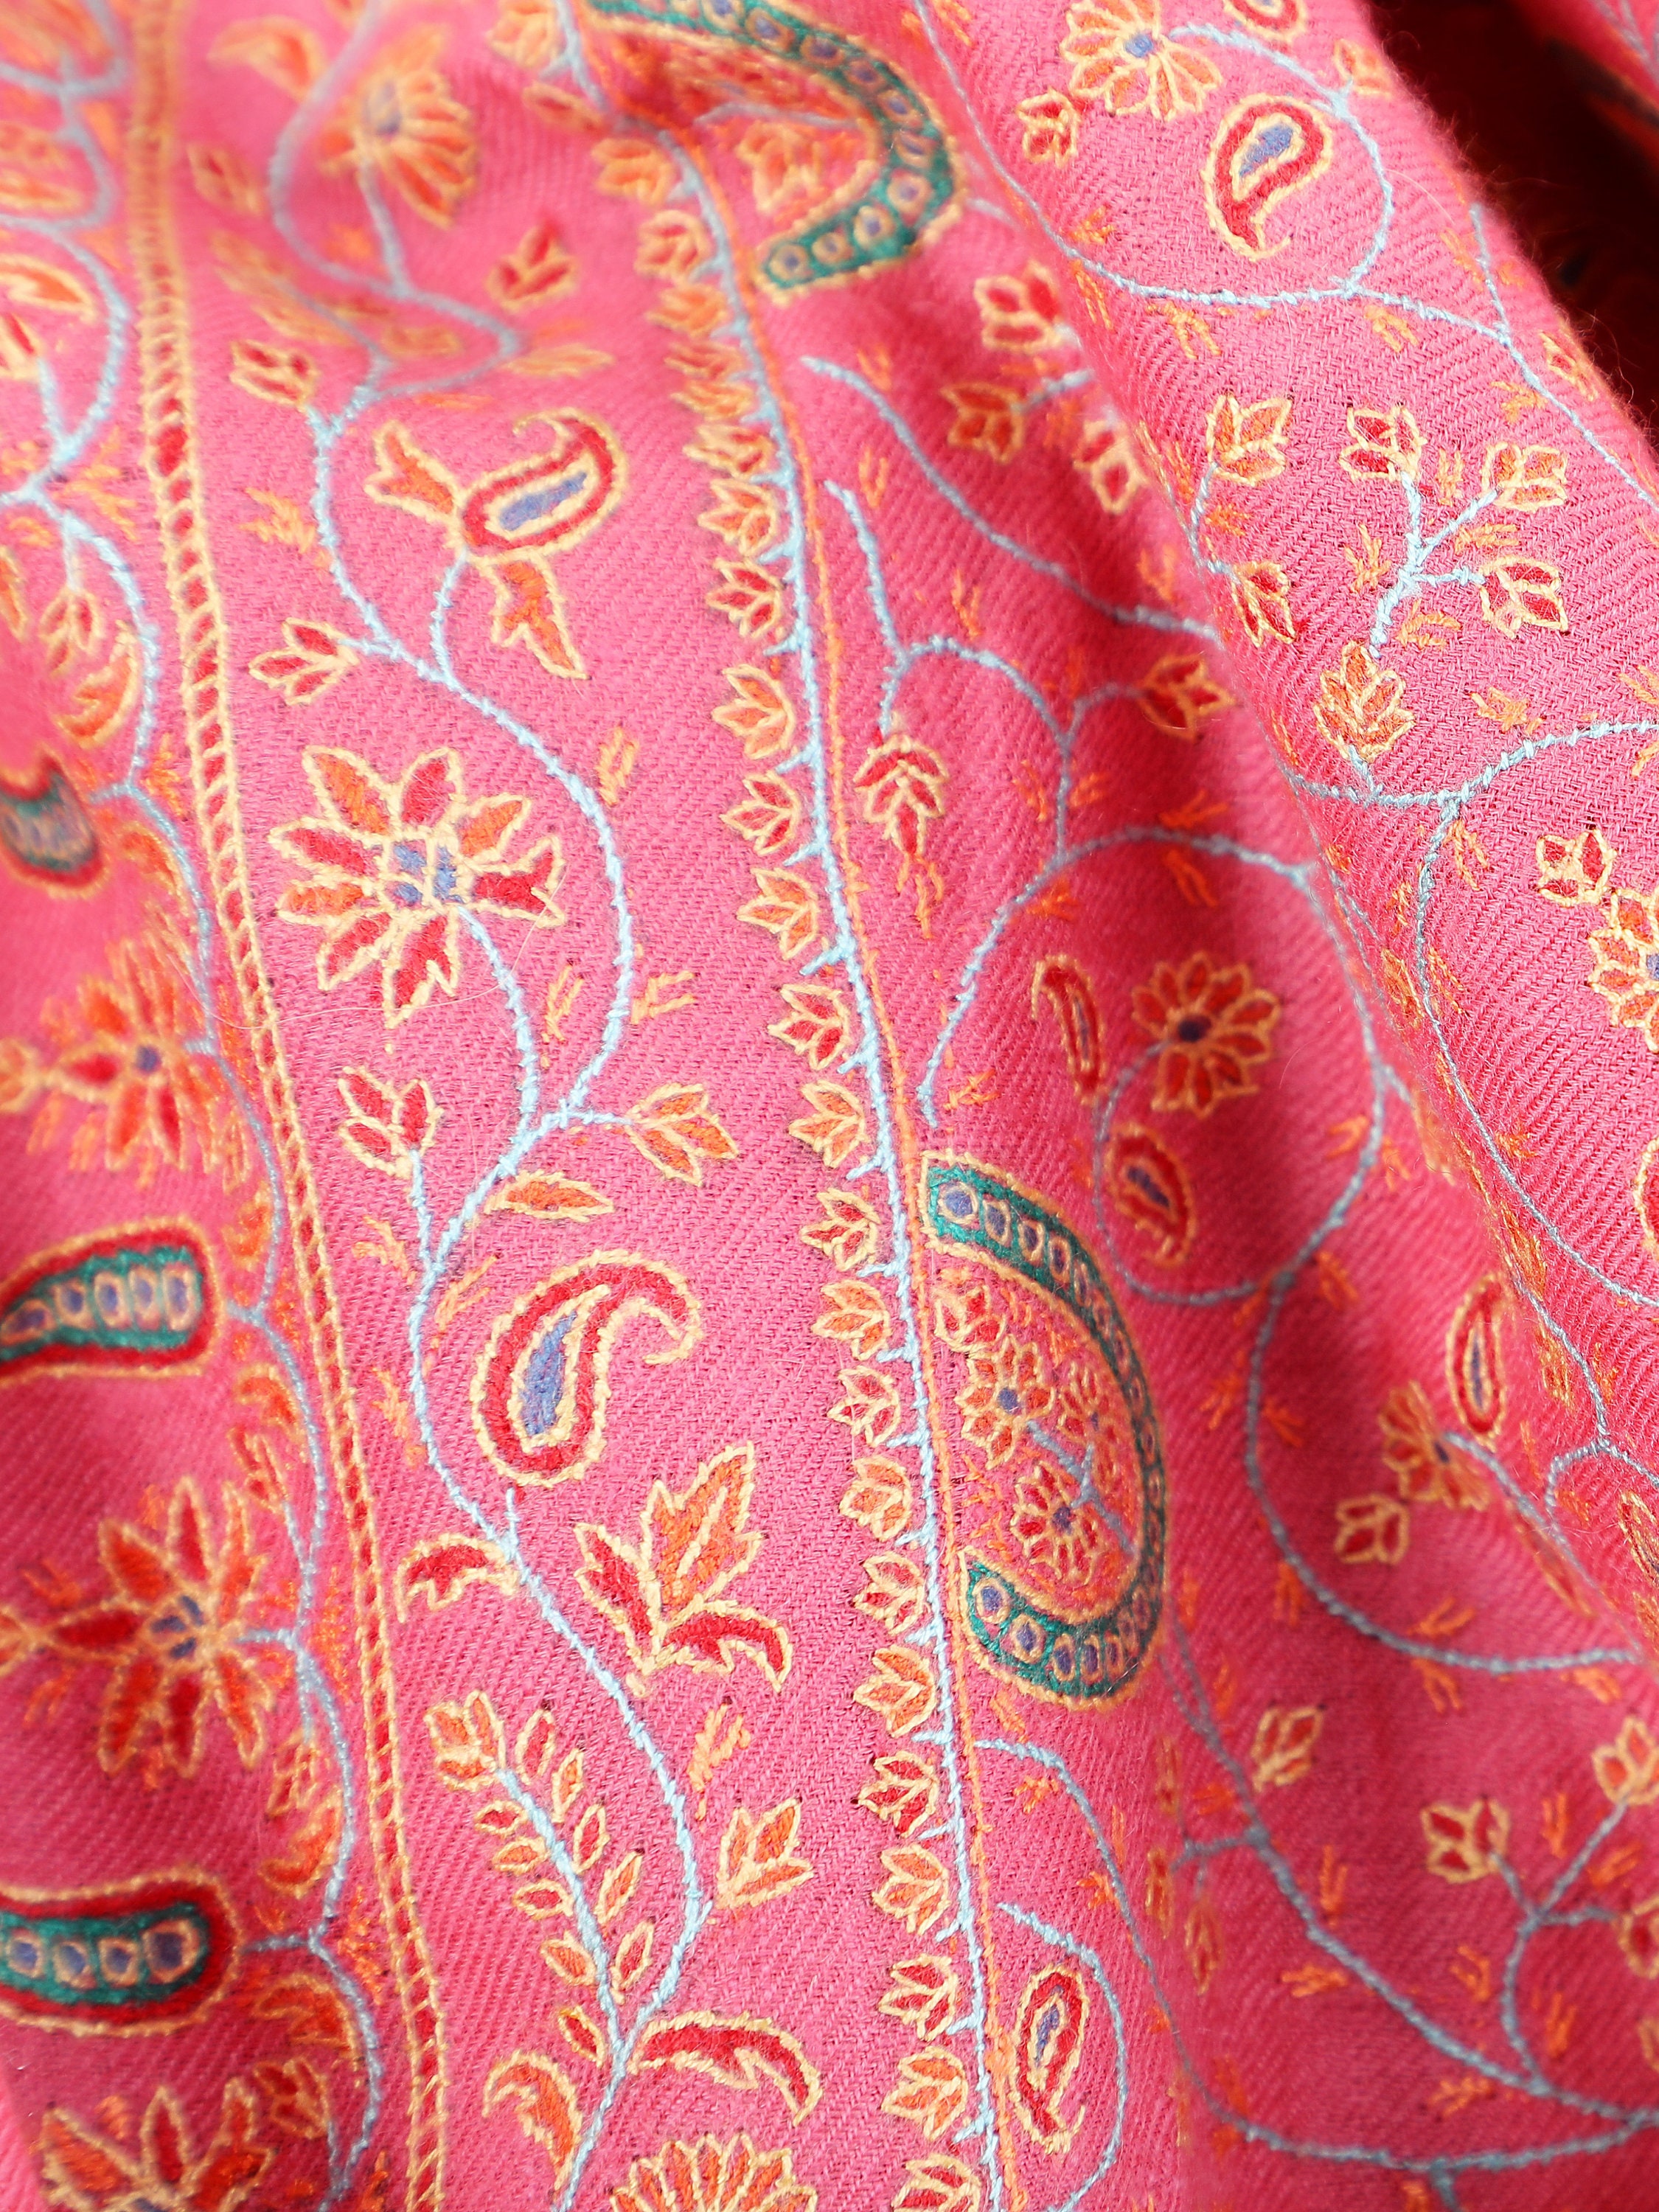 Pure Pashmina Kashmiri Shawl in Pink Color Hand Embroided | Etsy